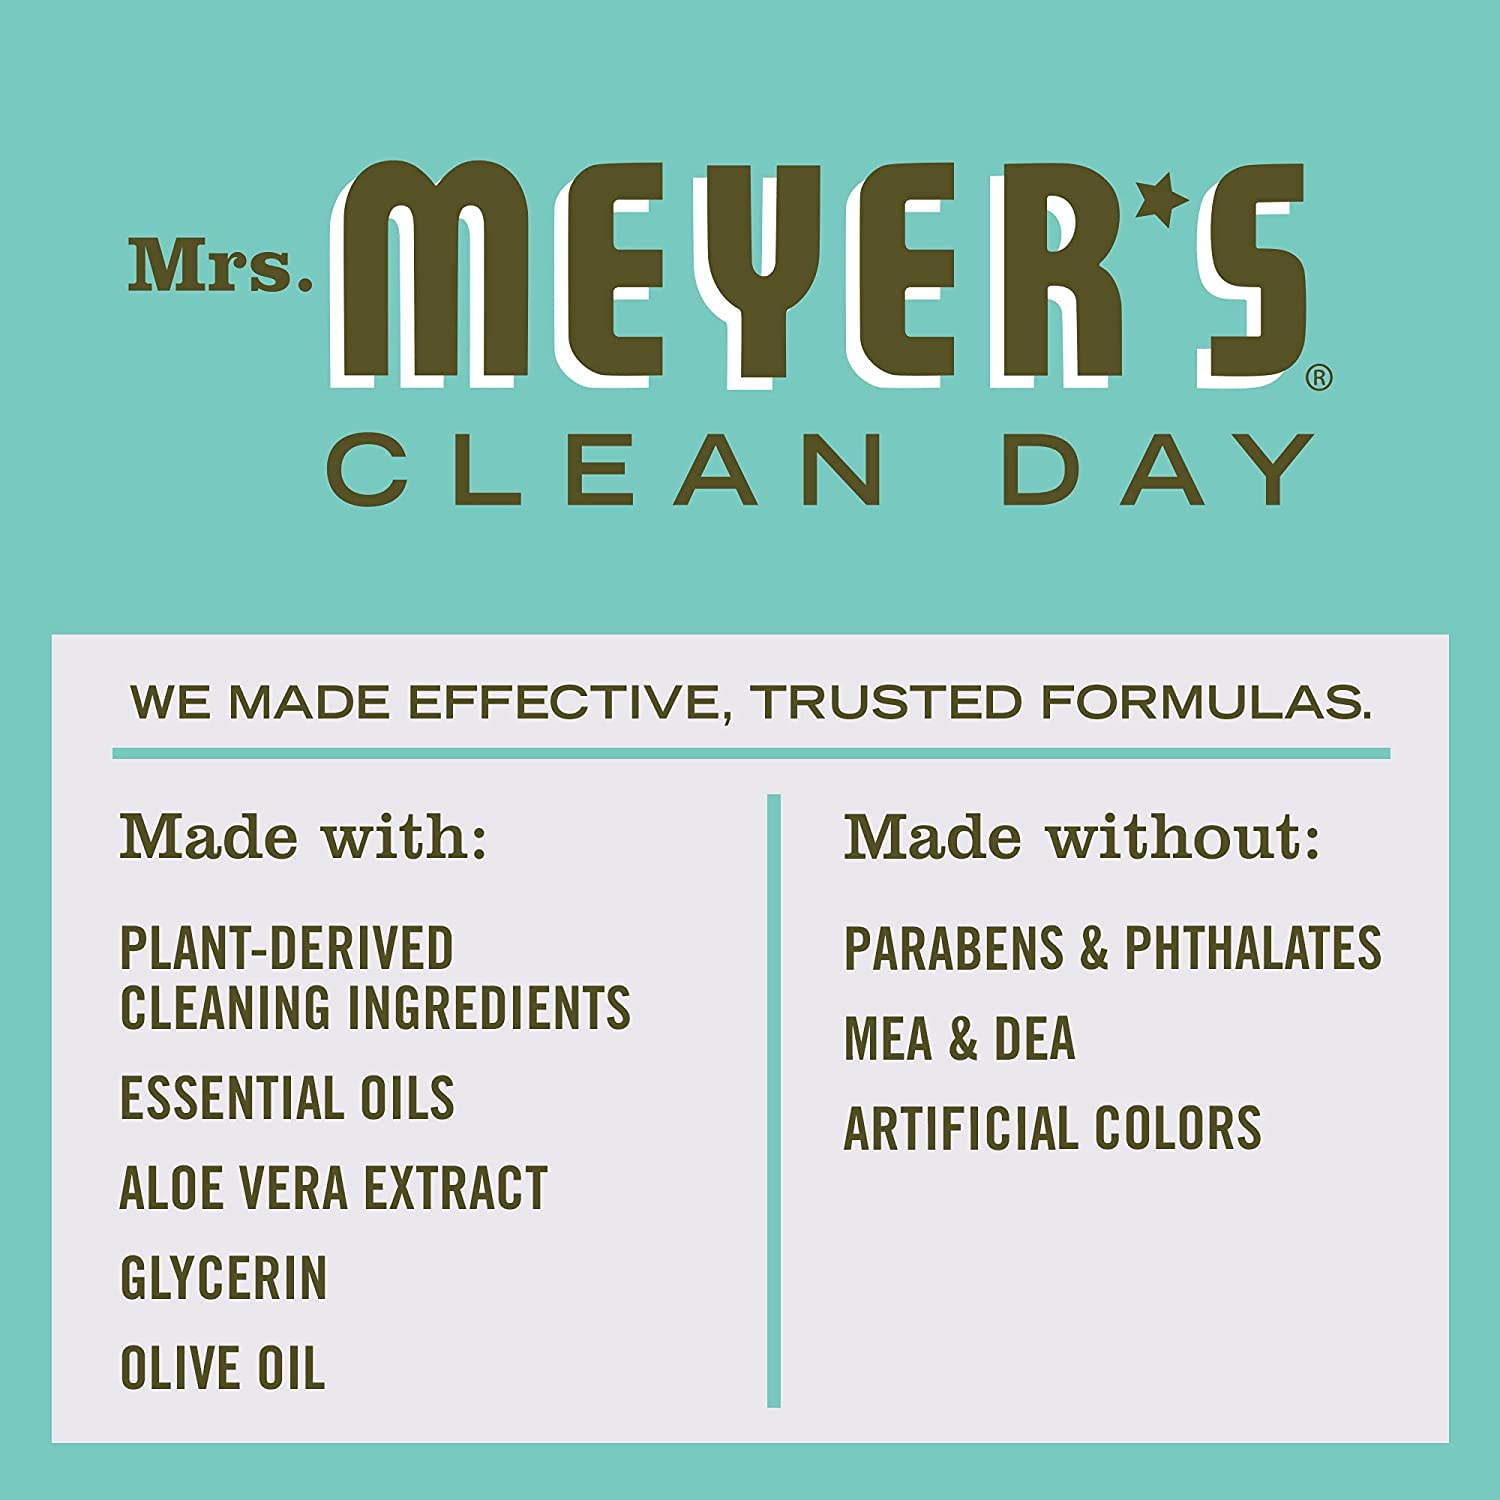 MRS. MEYER'S CLEAN DAY Hand Soap in Basil